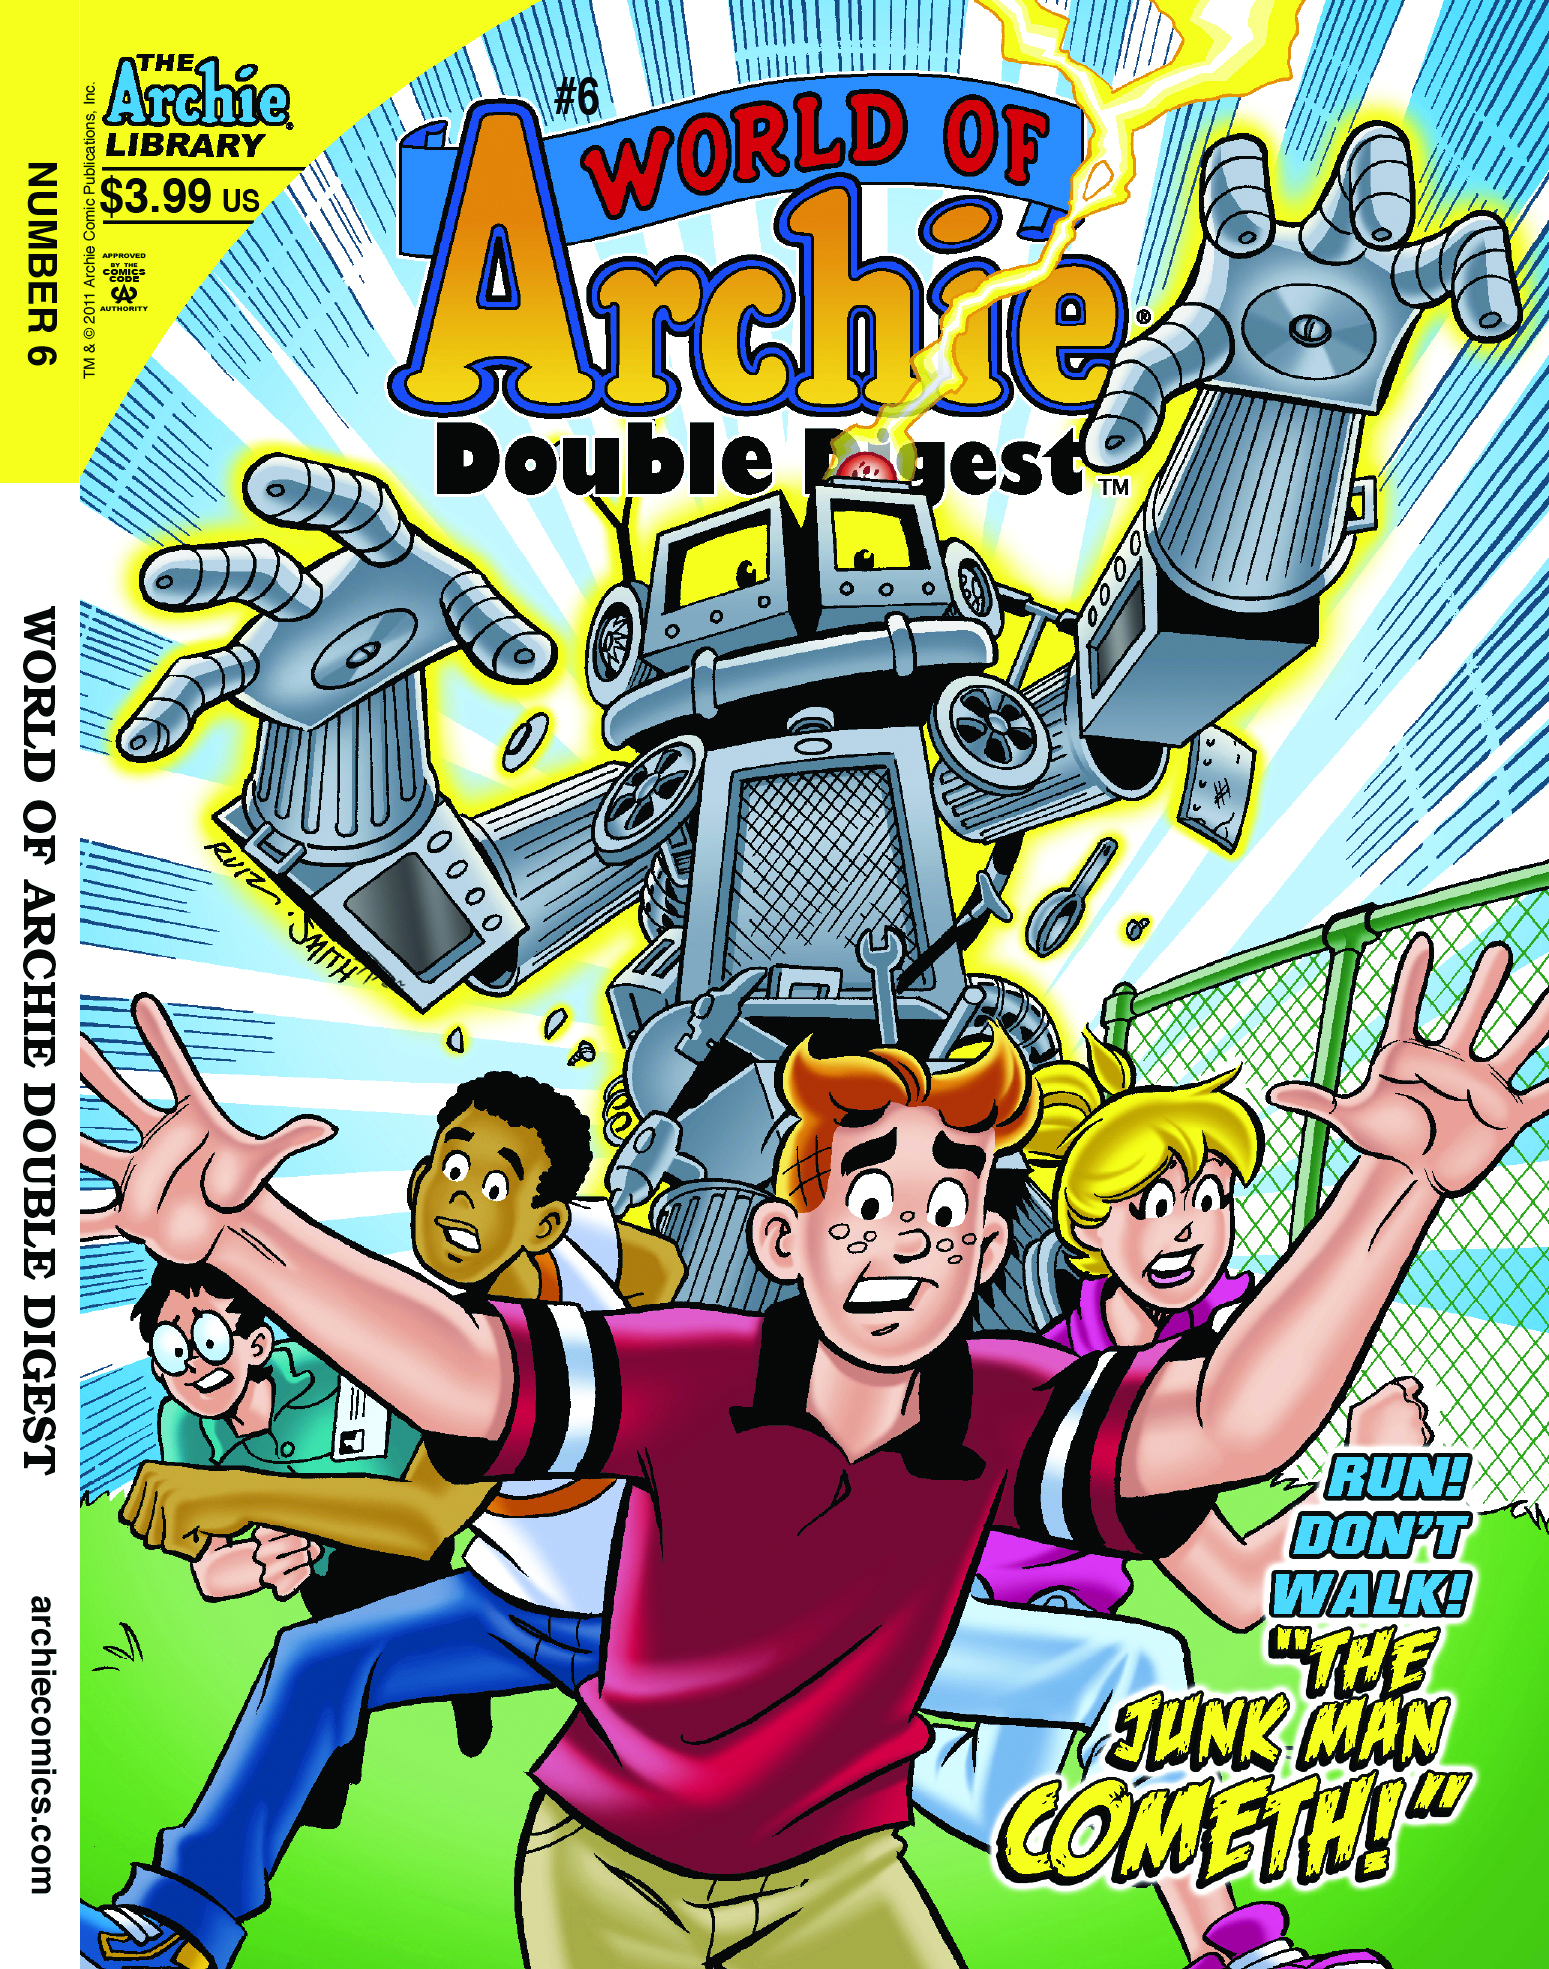 WORLD OF ARCHIE DOUBLE DIGEST #6